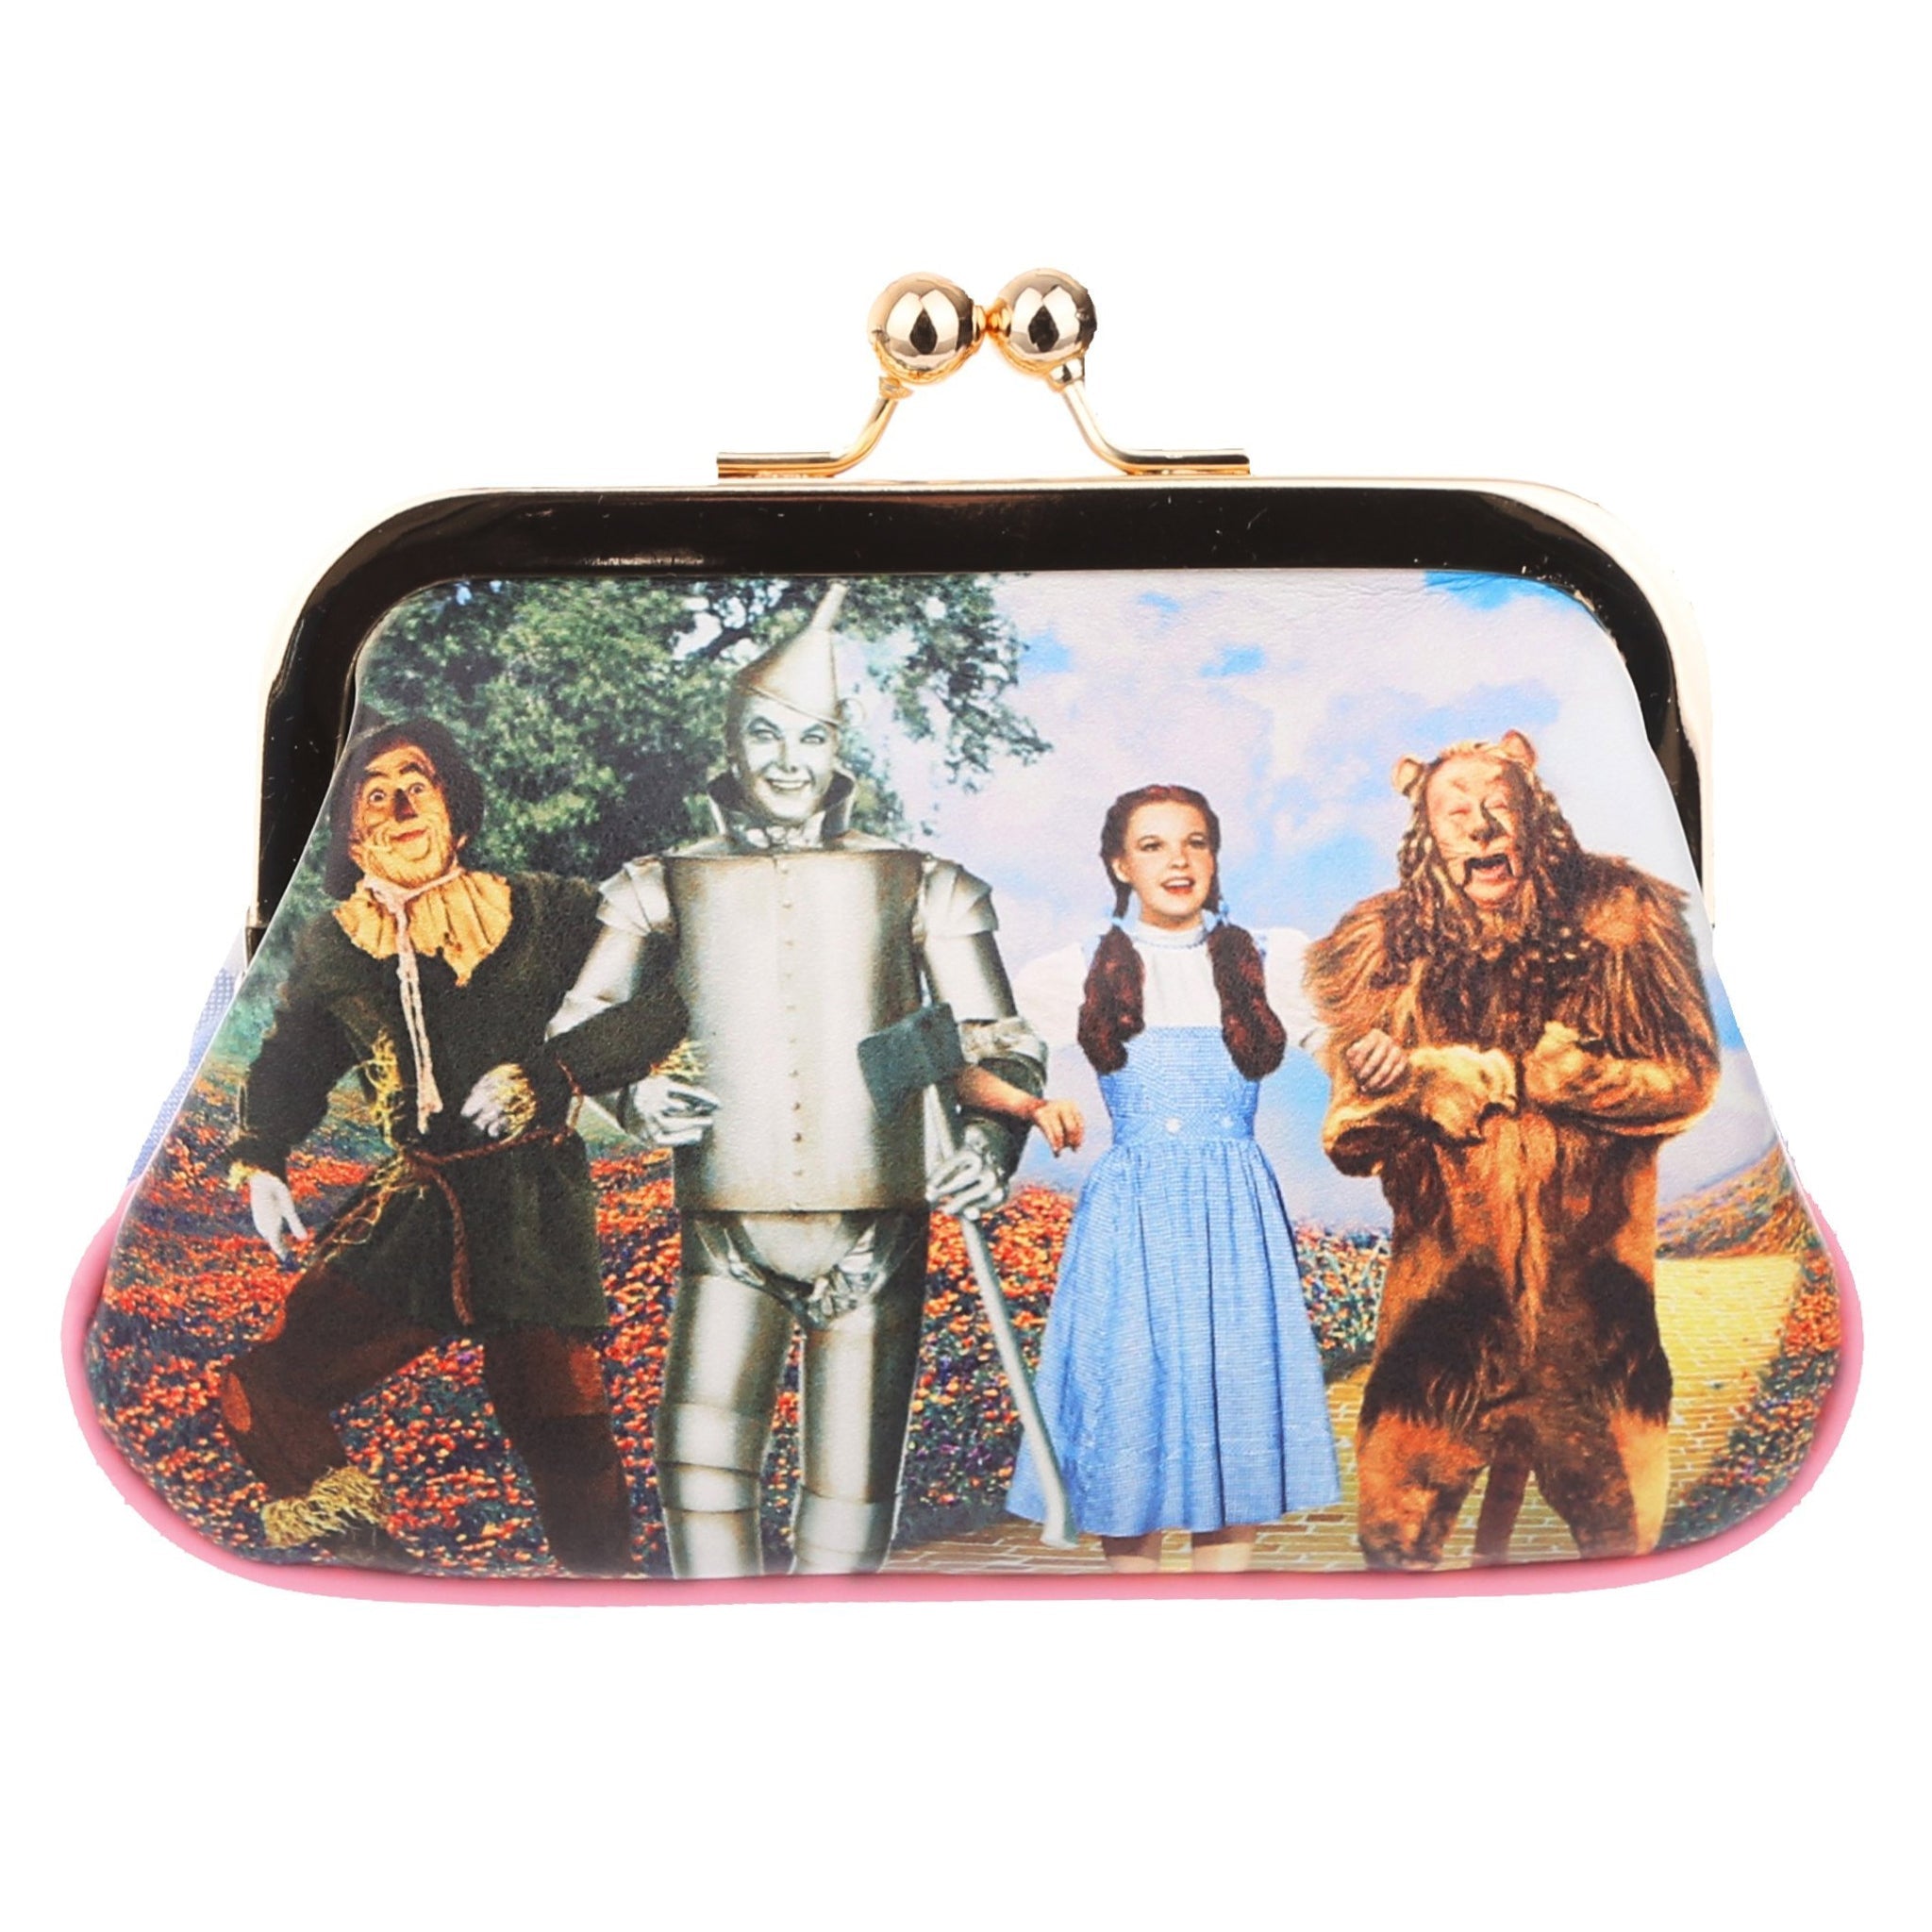 Go Over The Rainbow In Style With Coach's New 'Wizard of Oz' Collection —  Fashion and Fandom